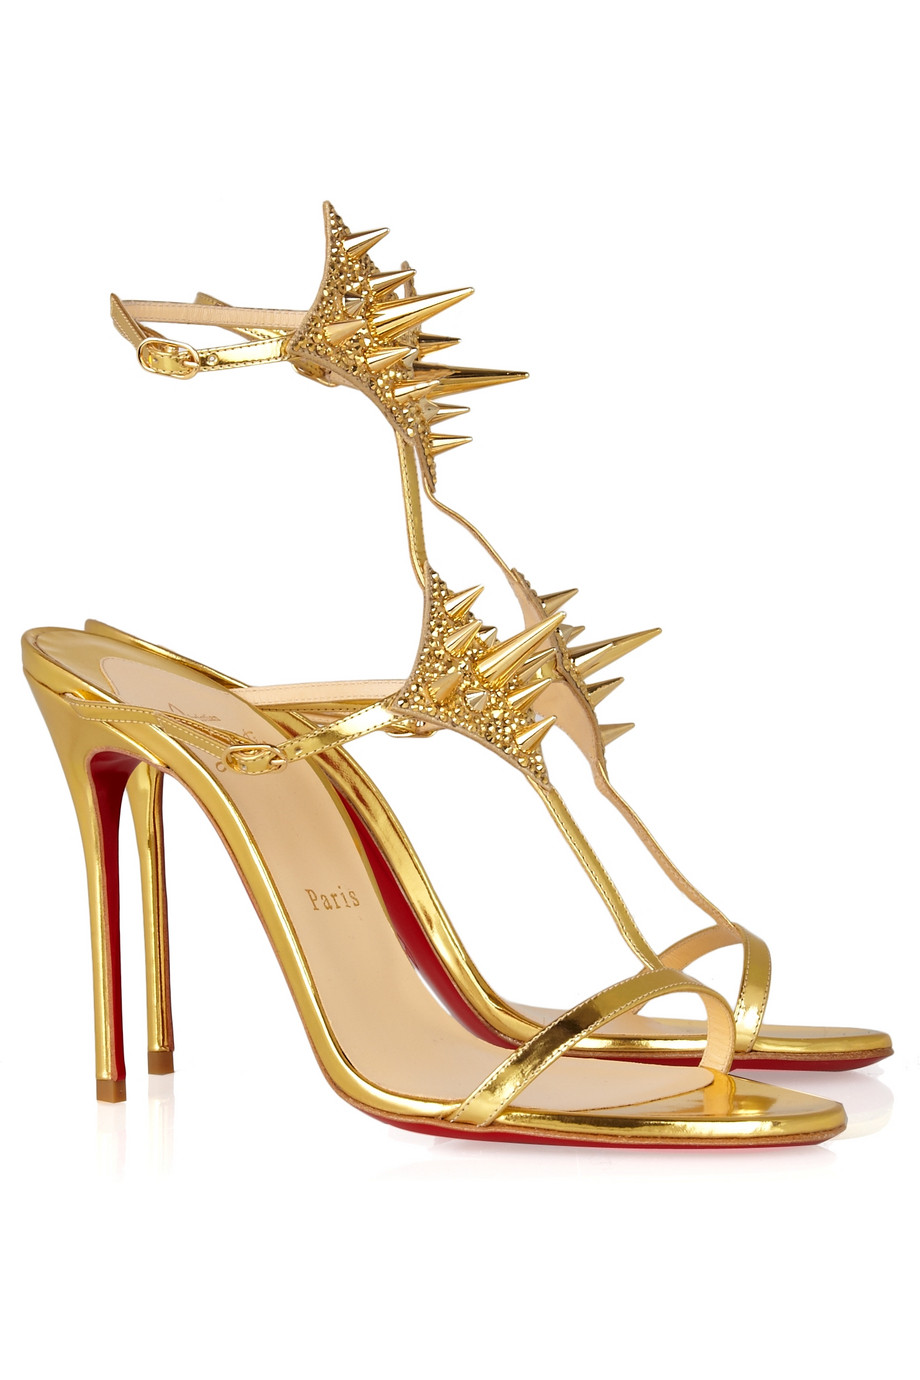 Nosy spikes heels Christian Louboutin Gold size 39 EU in Plastic - 11247908